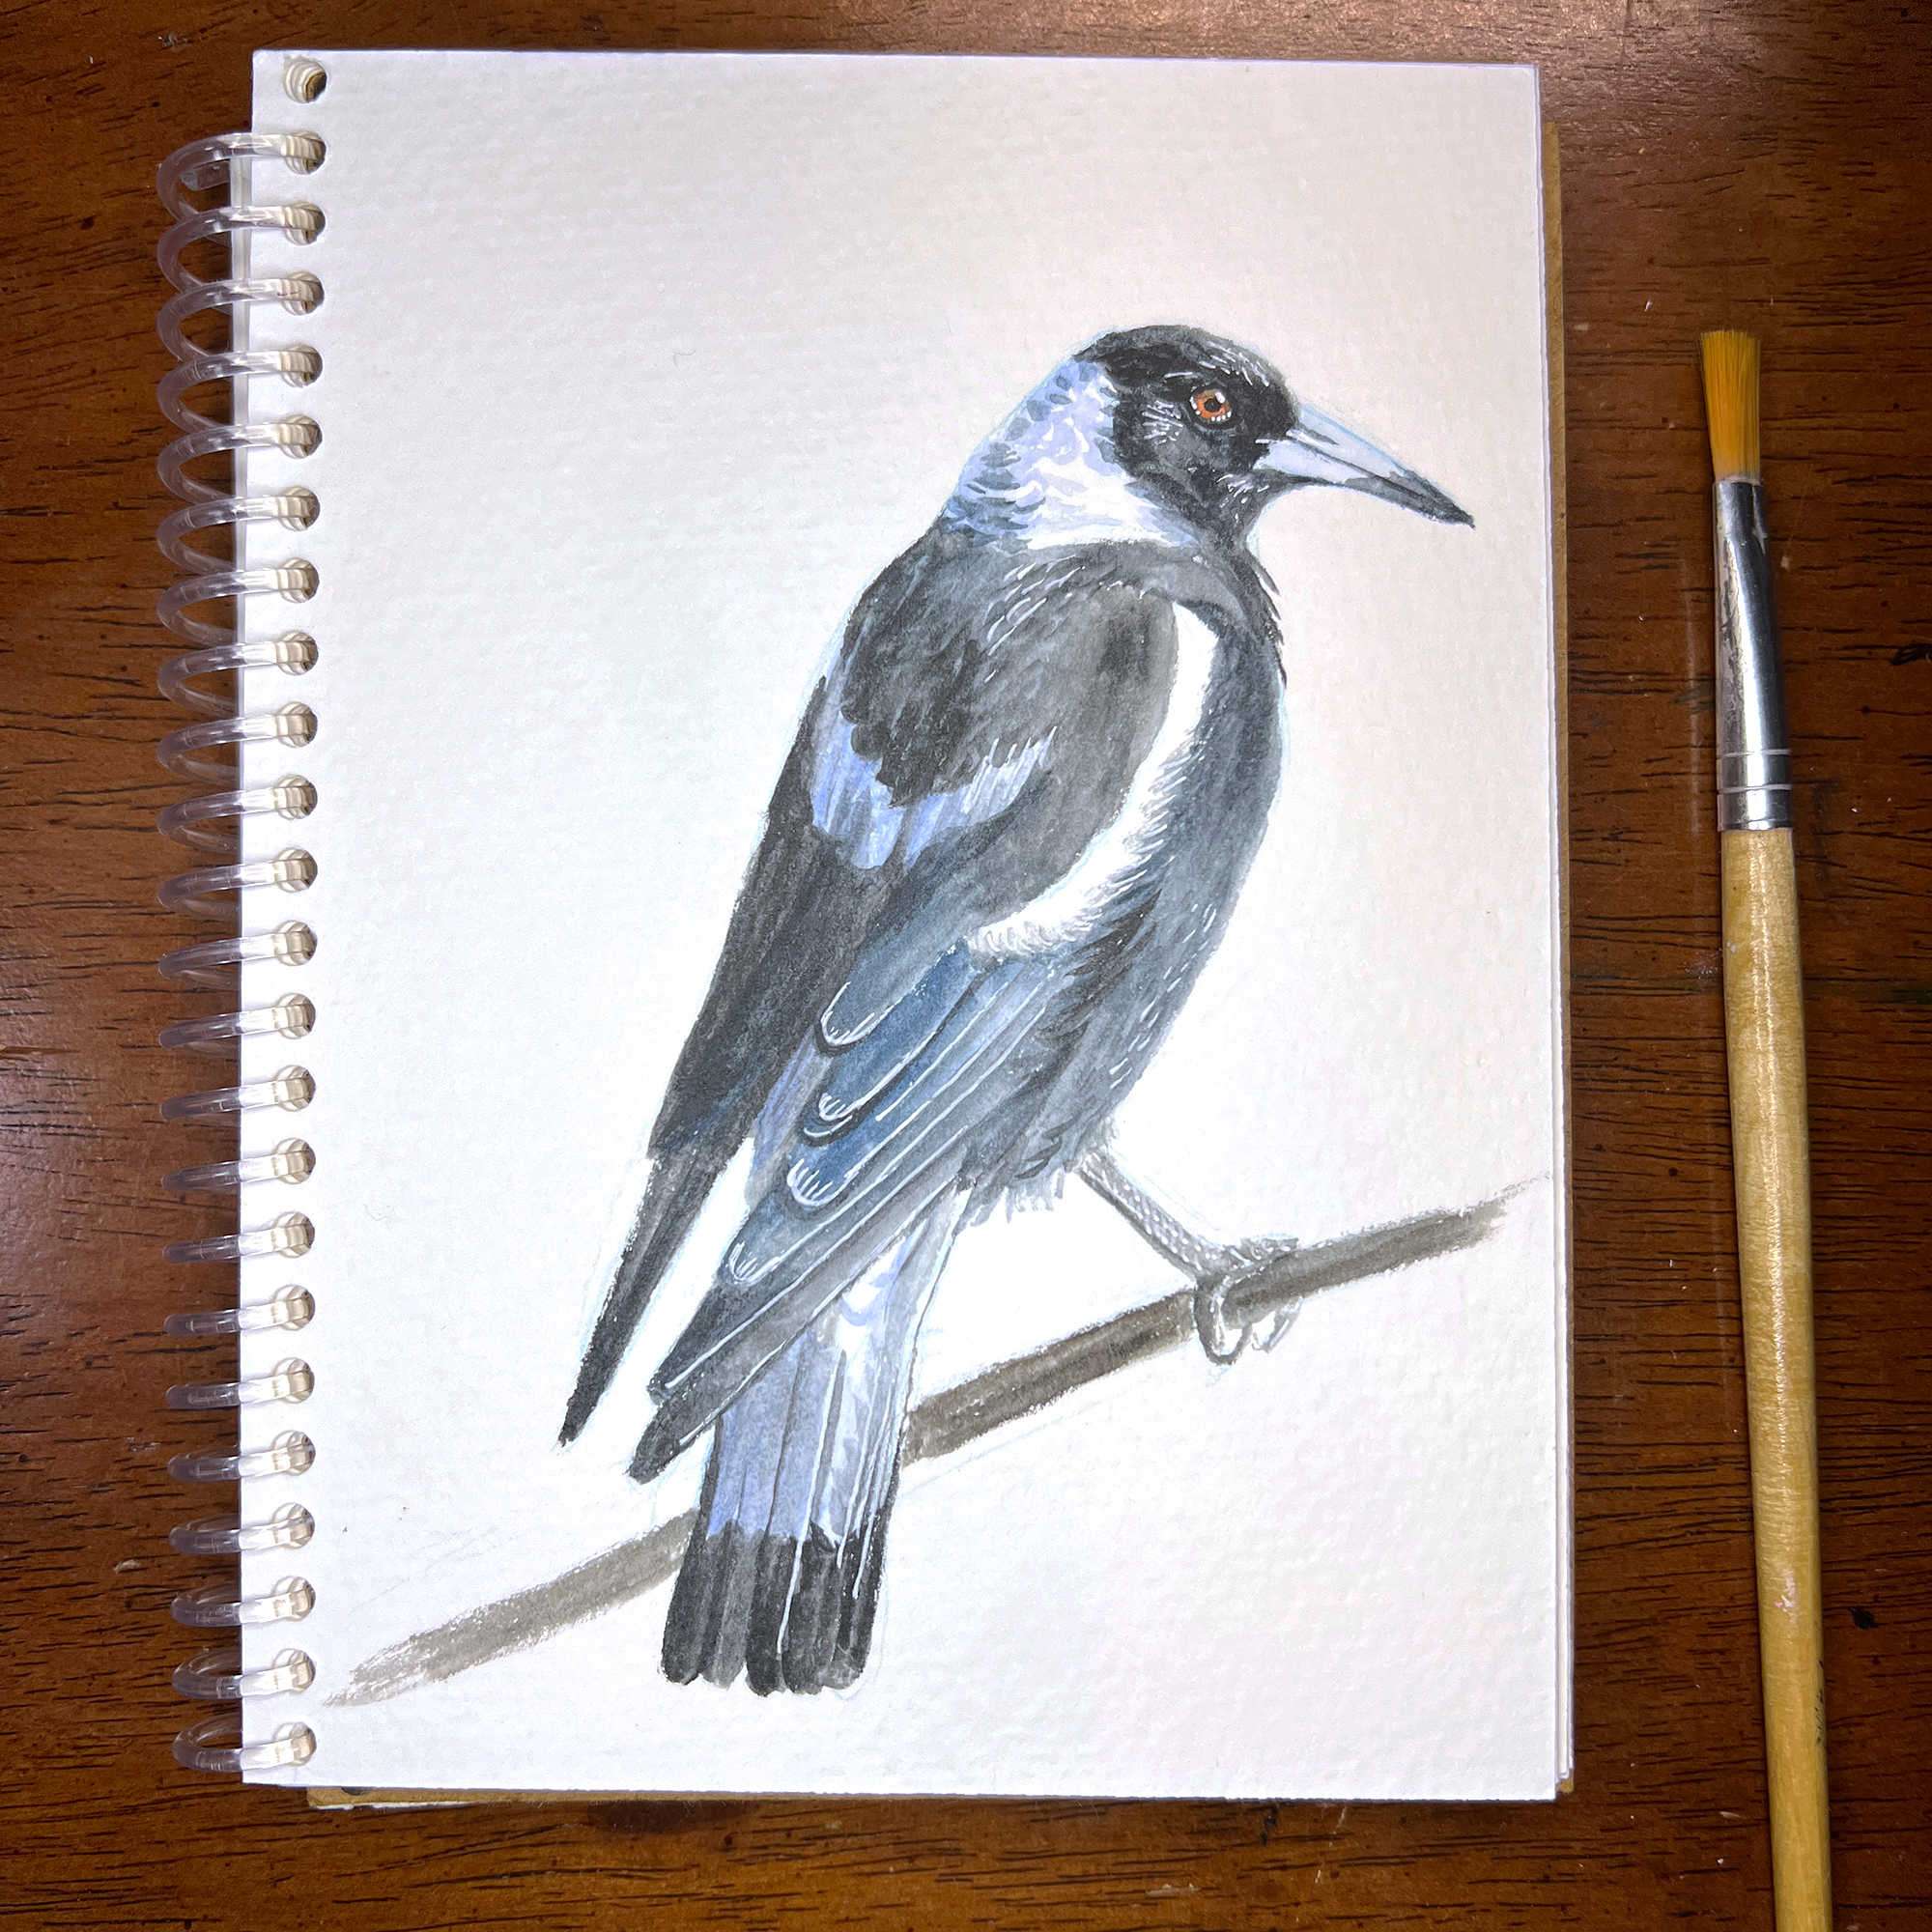 Artistic watercolor rendition of a magpie showcased on a spiral-bound notebook with a brush aside.